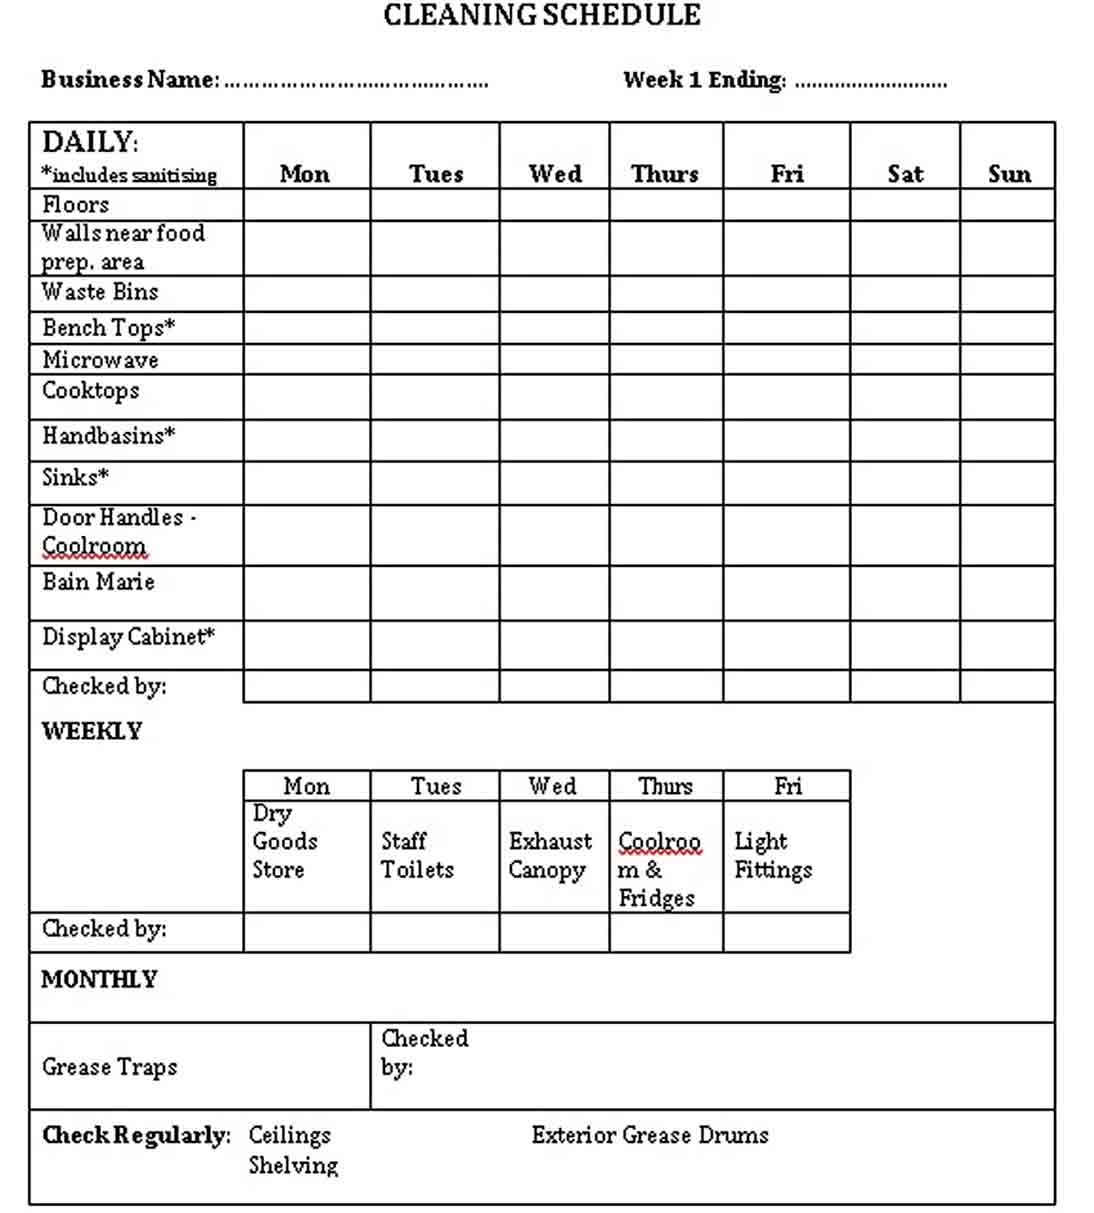 Restaurant Cleaning Schedule Template  think moldova Pertaining To Restaurant Cleaning Checklist Template In Restaurant Cleaning Checklist Template